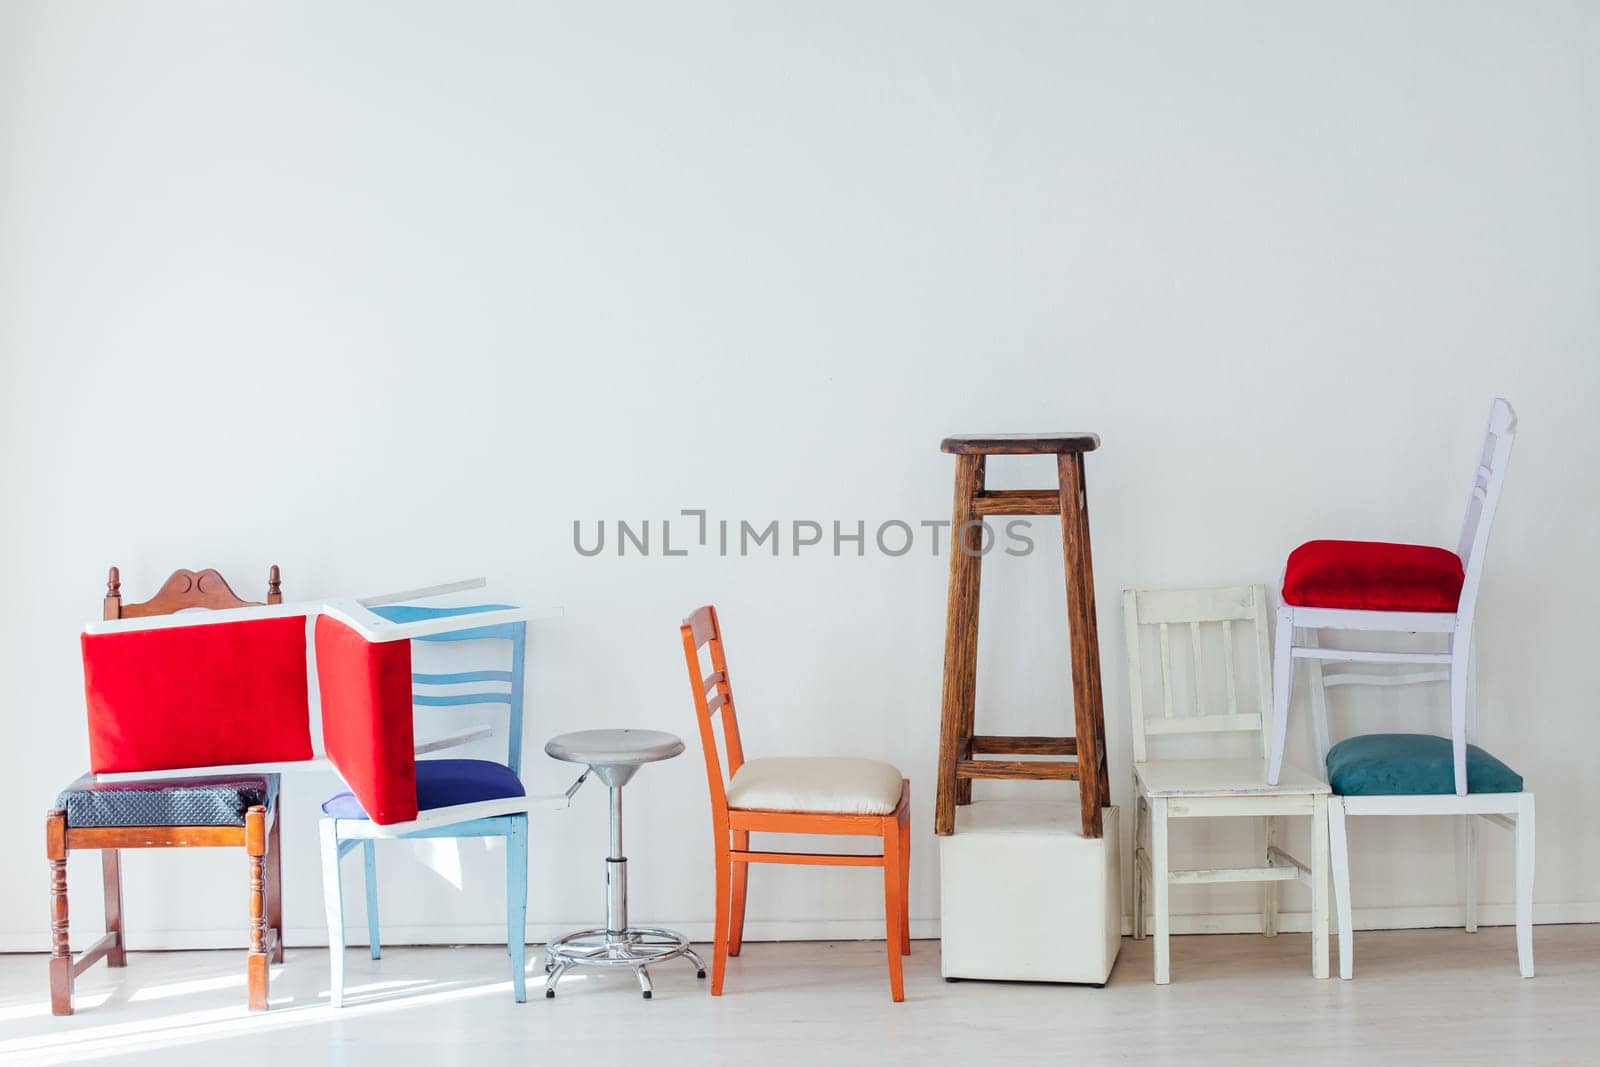 lots of different chairs in the interior of the white room by Simakov